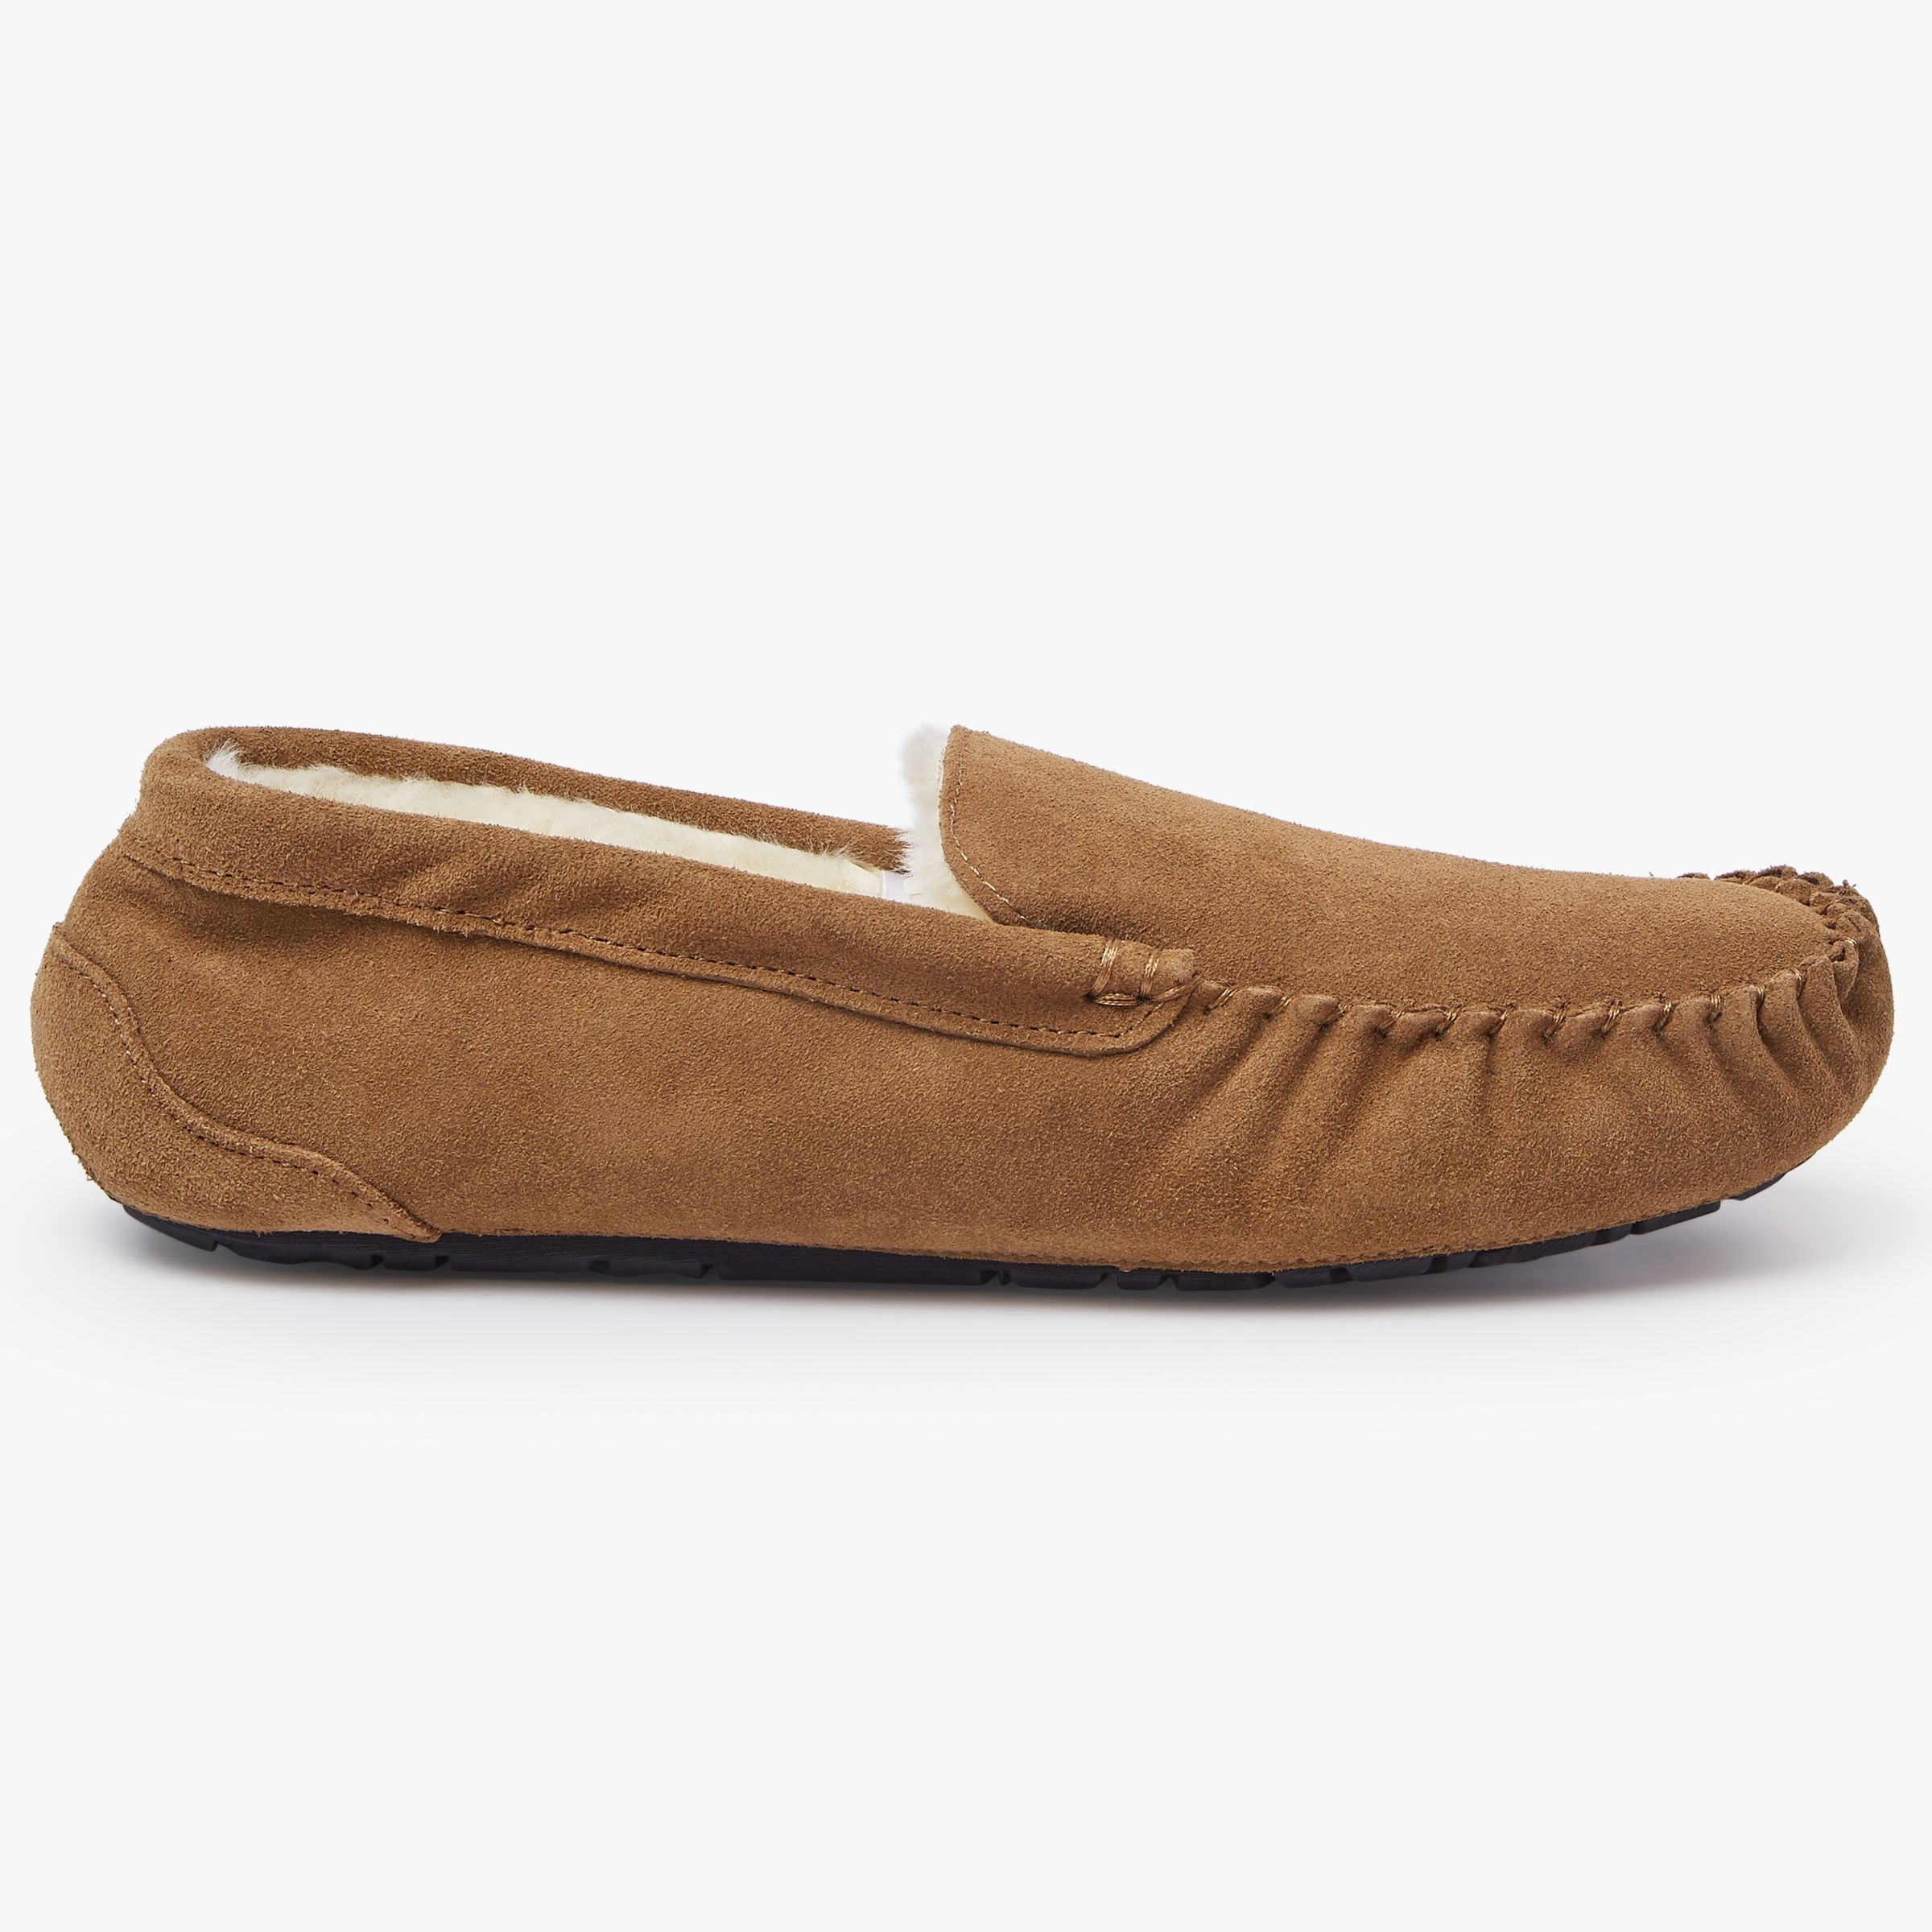 John Lewis & Partners Moccasin Faux Fur Lined Slippers, Chestnut, 7